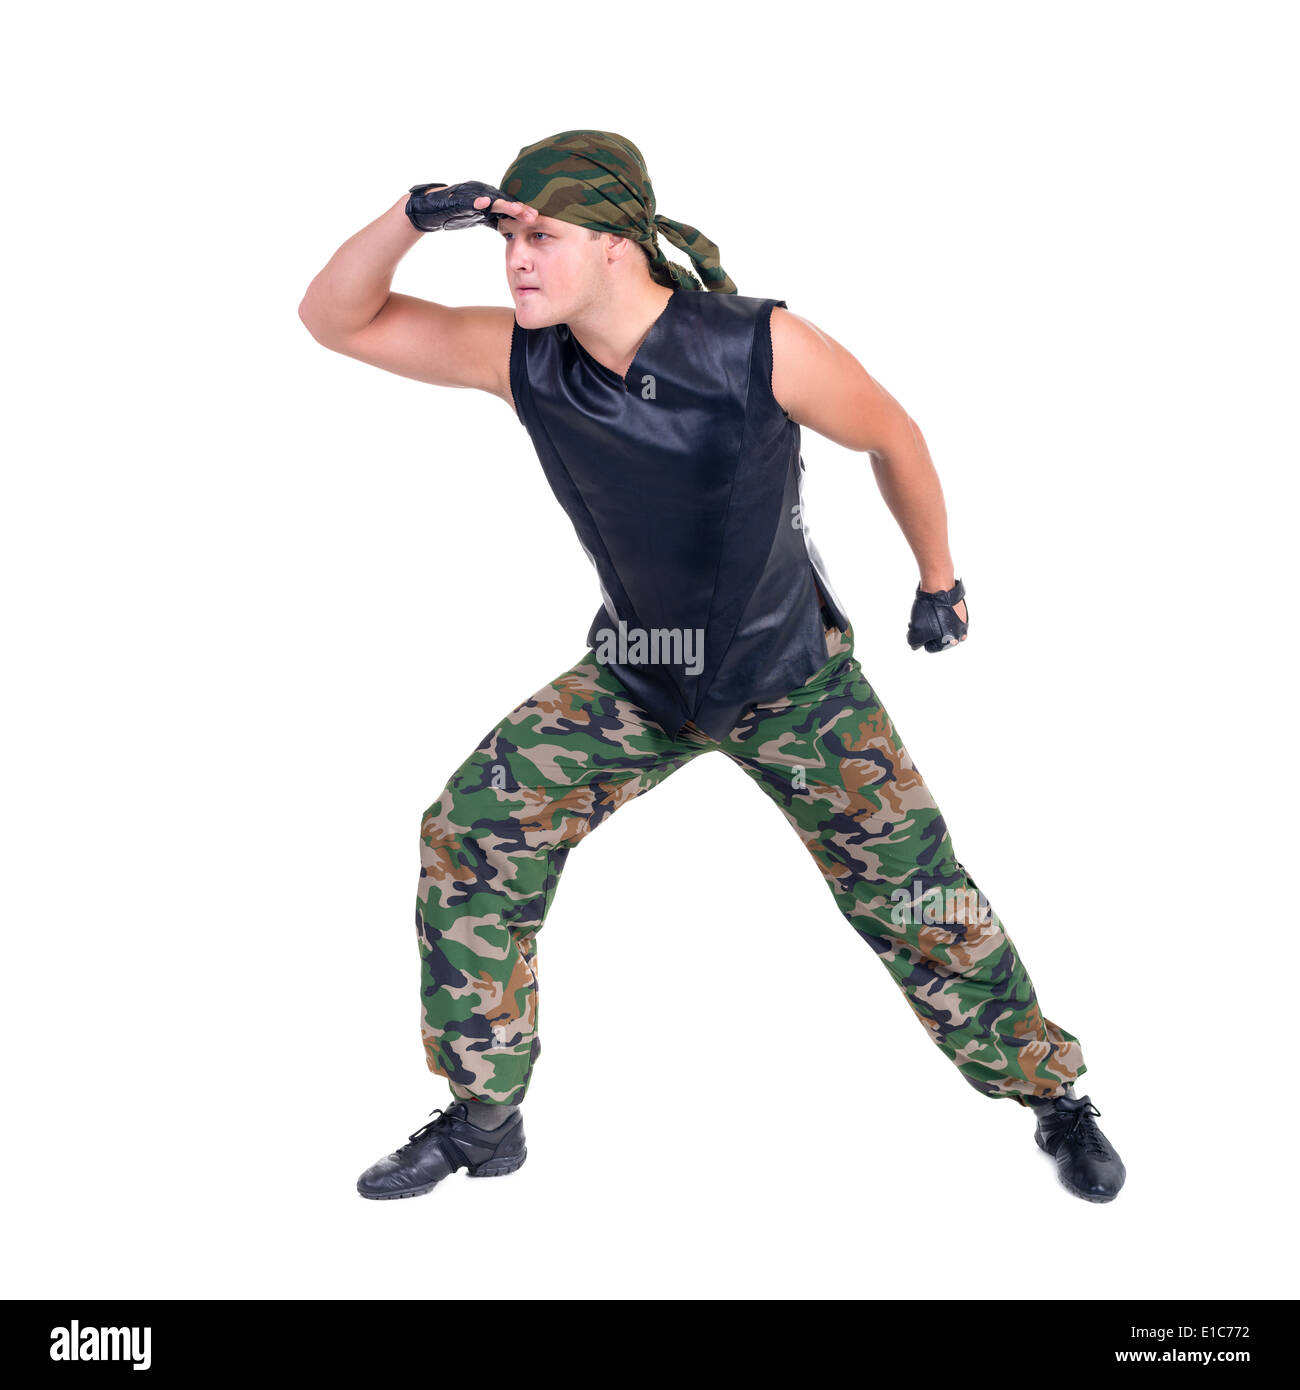 Soldiers in camouflage uniforms, isolated on white background Stock Photo